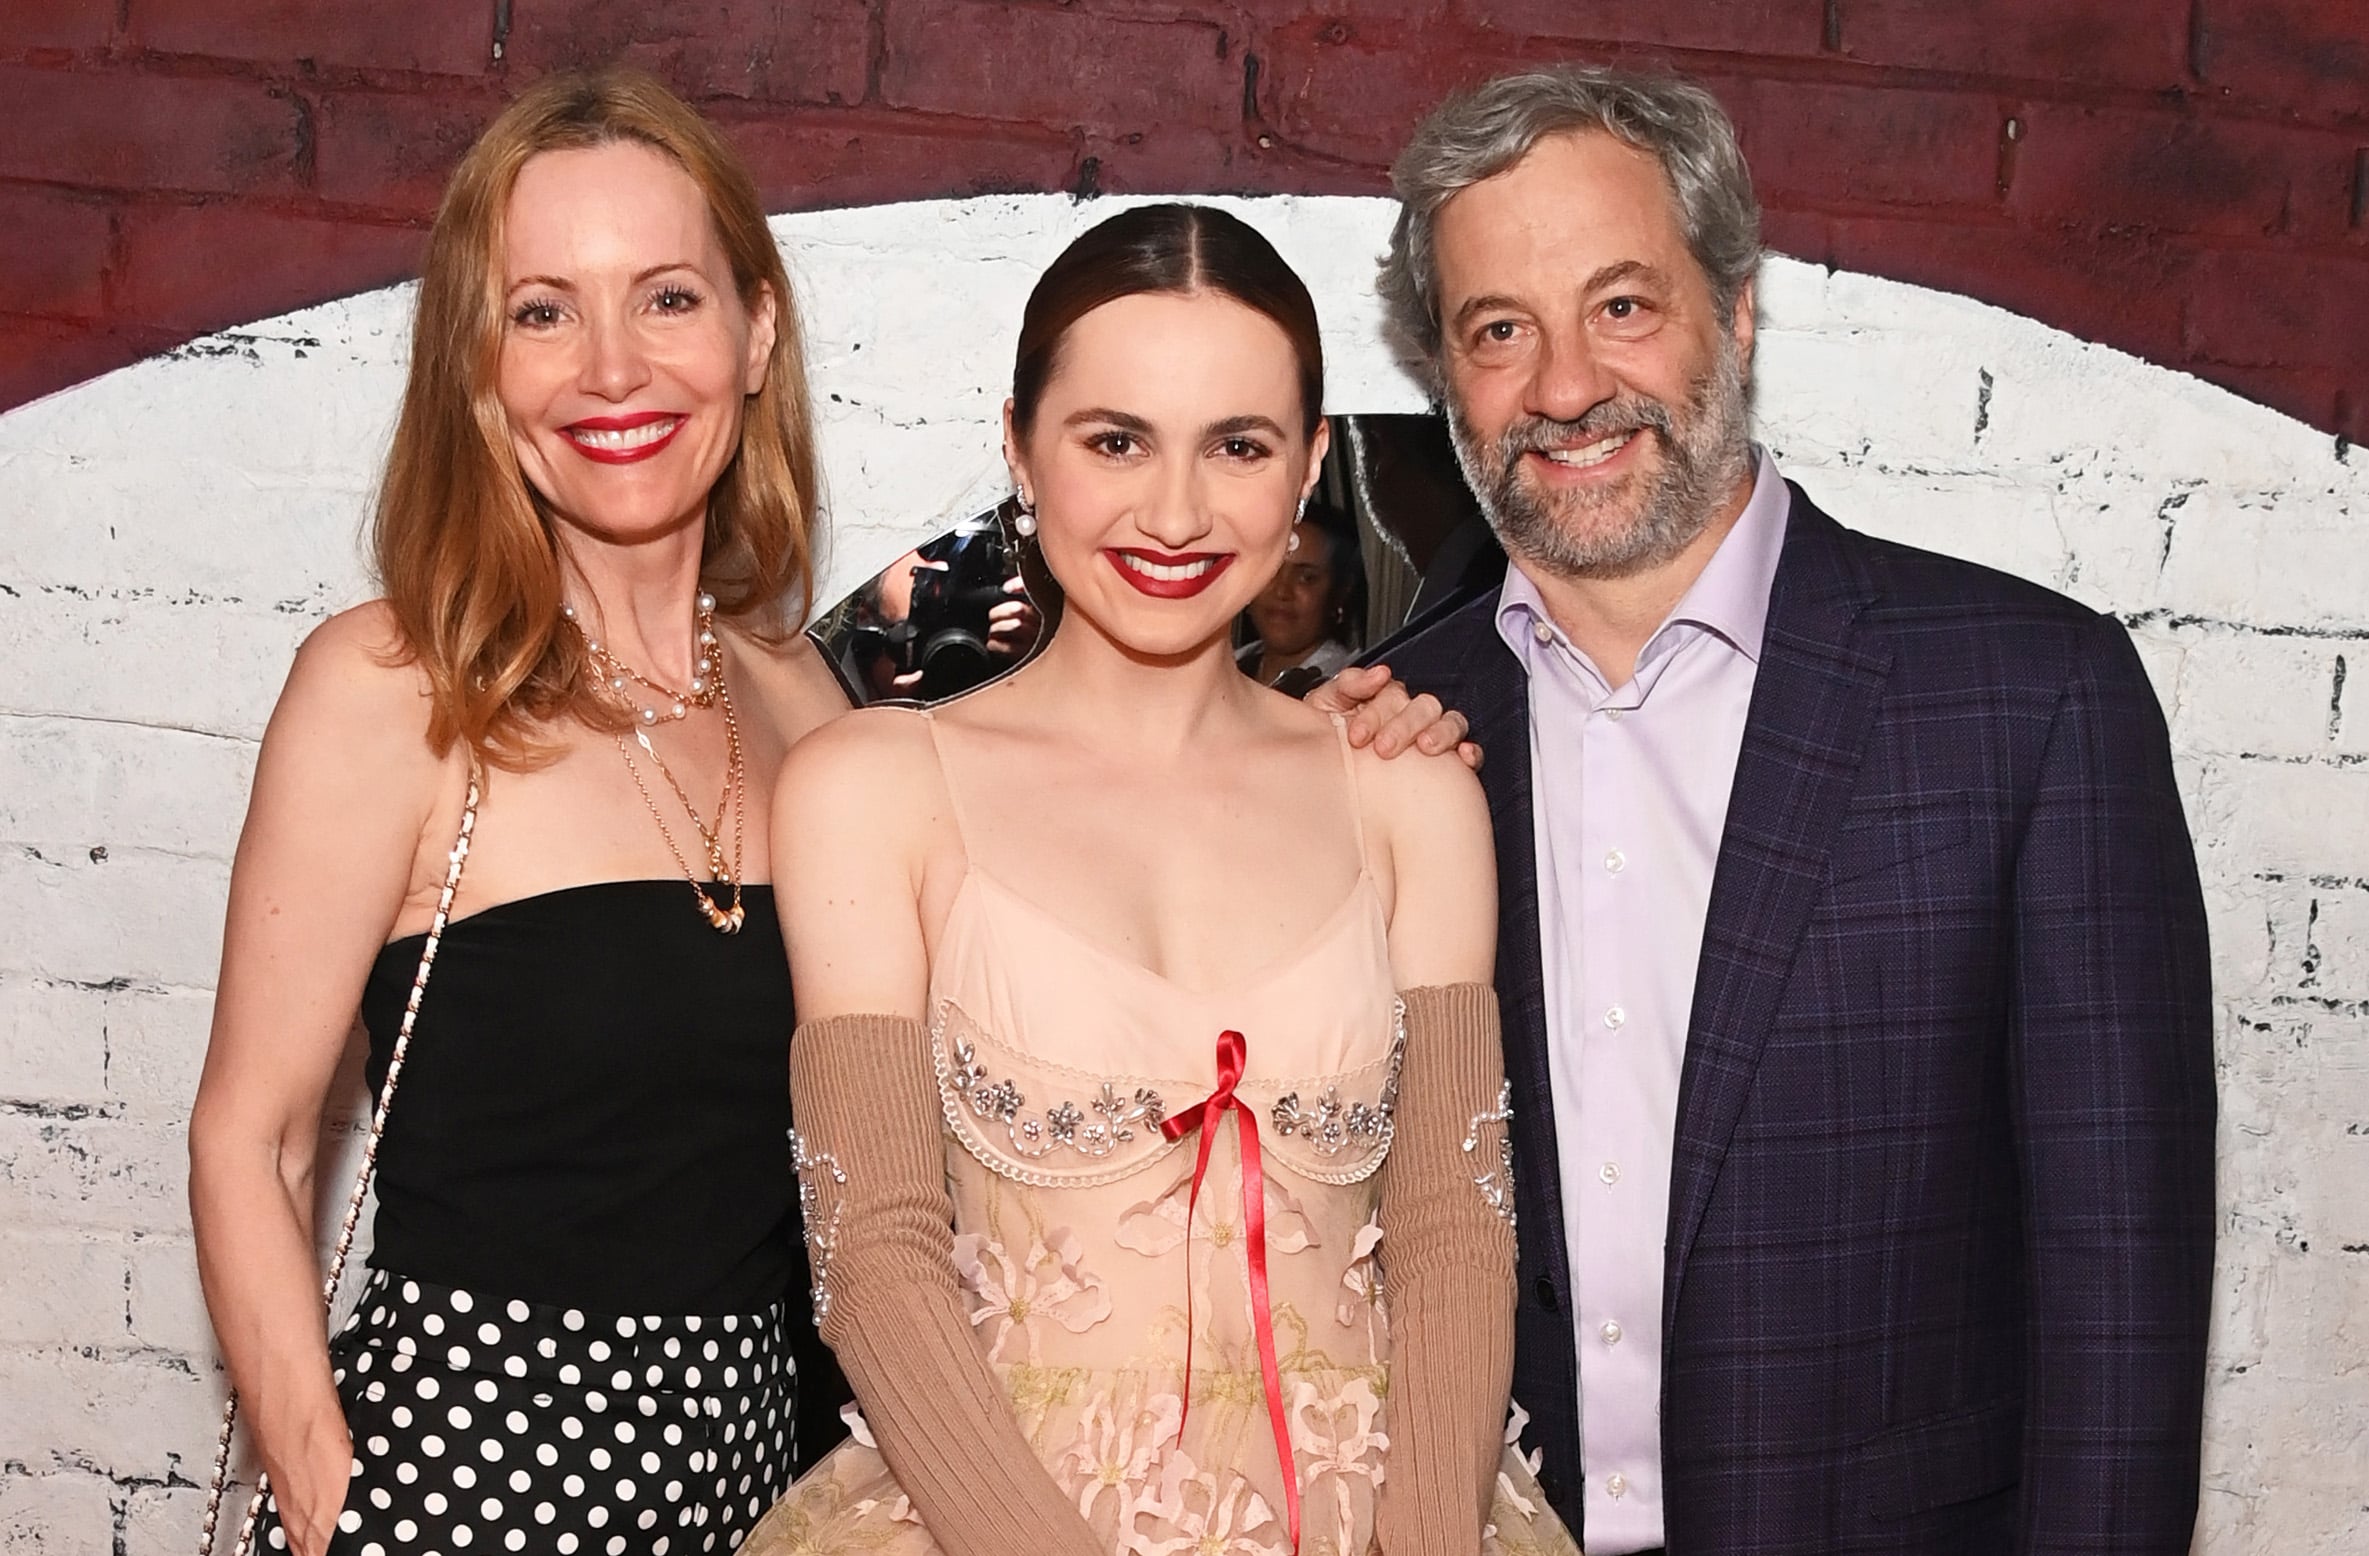 Maude Apatow to Make Her Off-Broadway Debut in Little Shop of